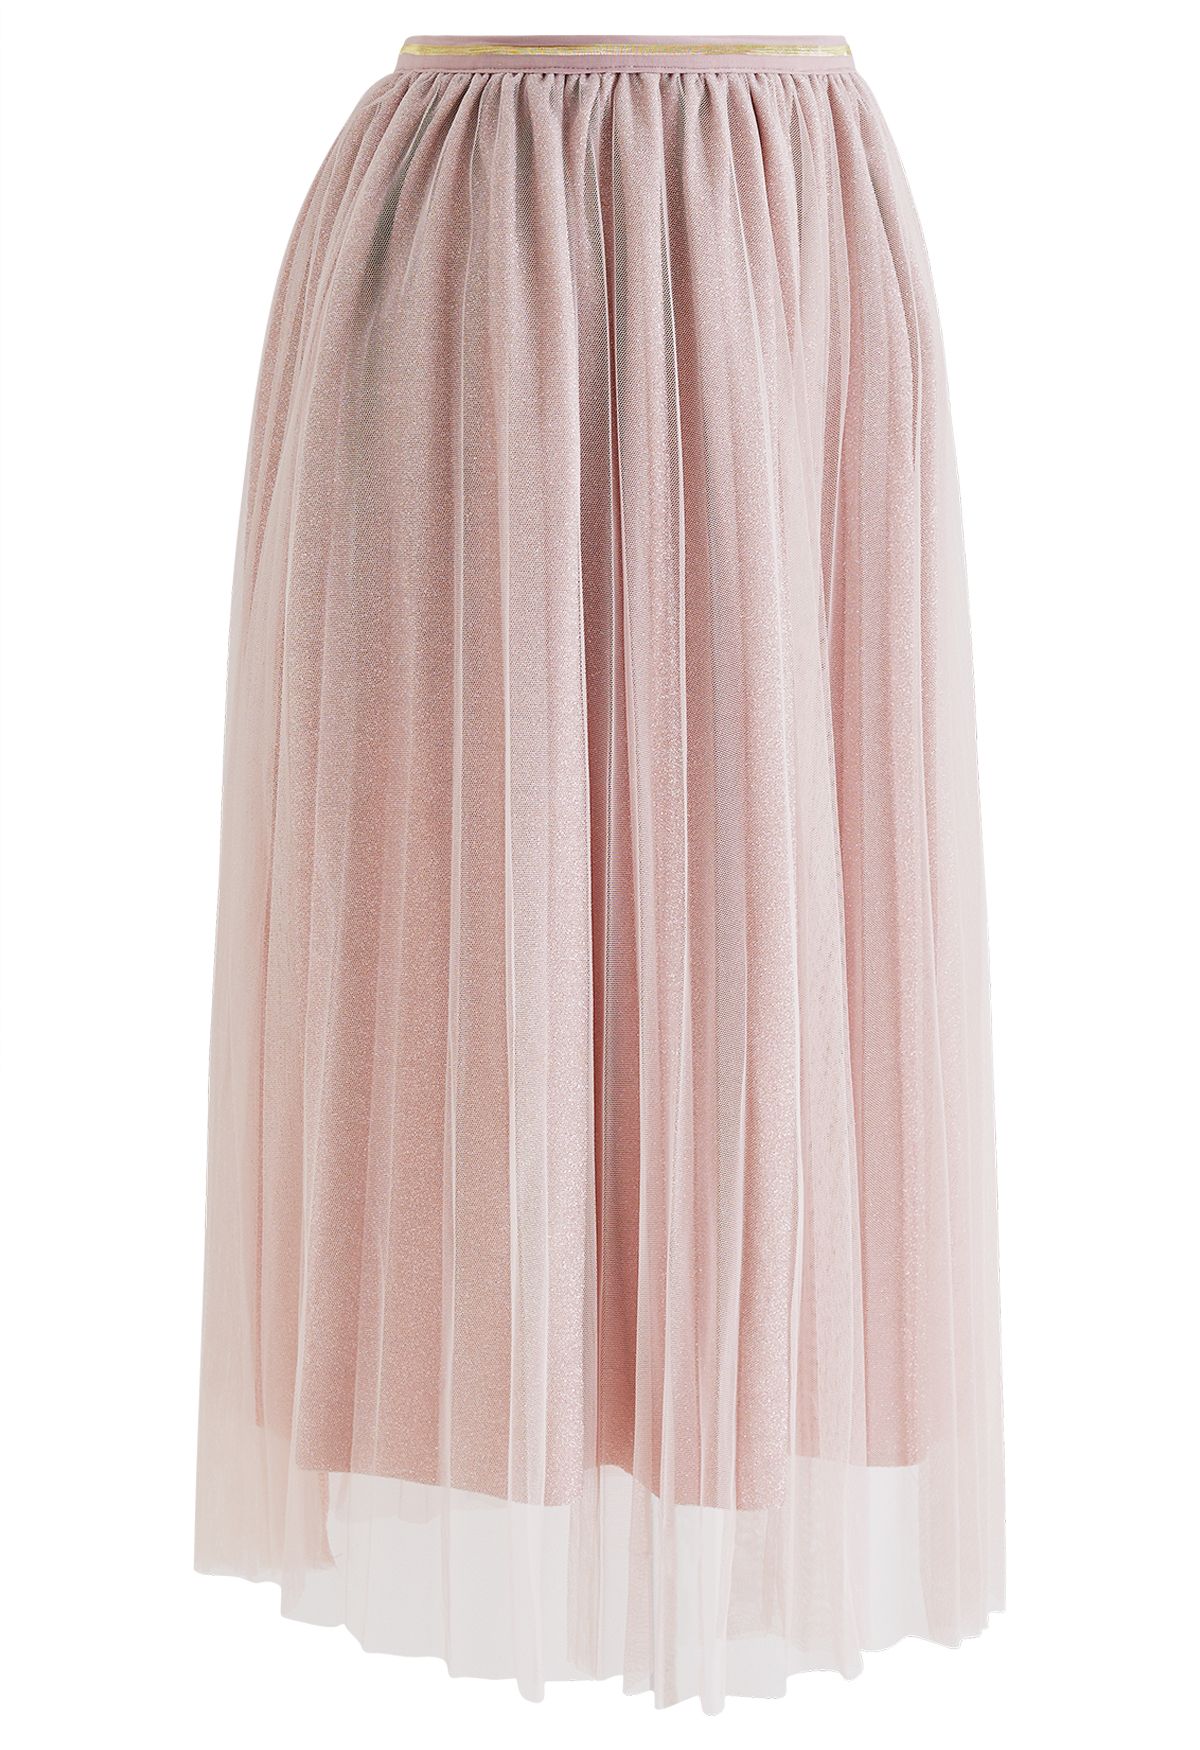 Glimmering Pleated Mesh Midi Skirt in Pink - Retro, Indie and Unique ...